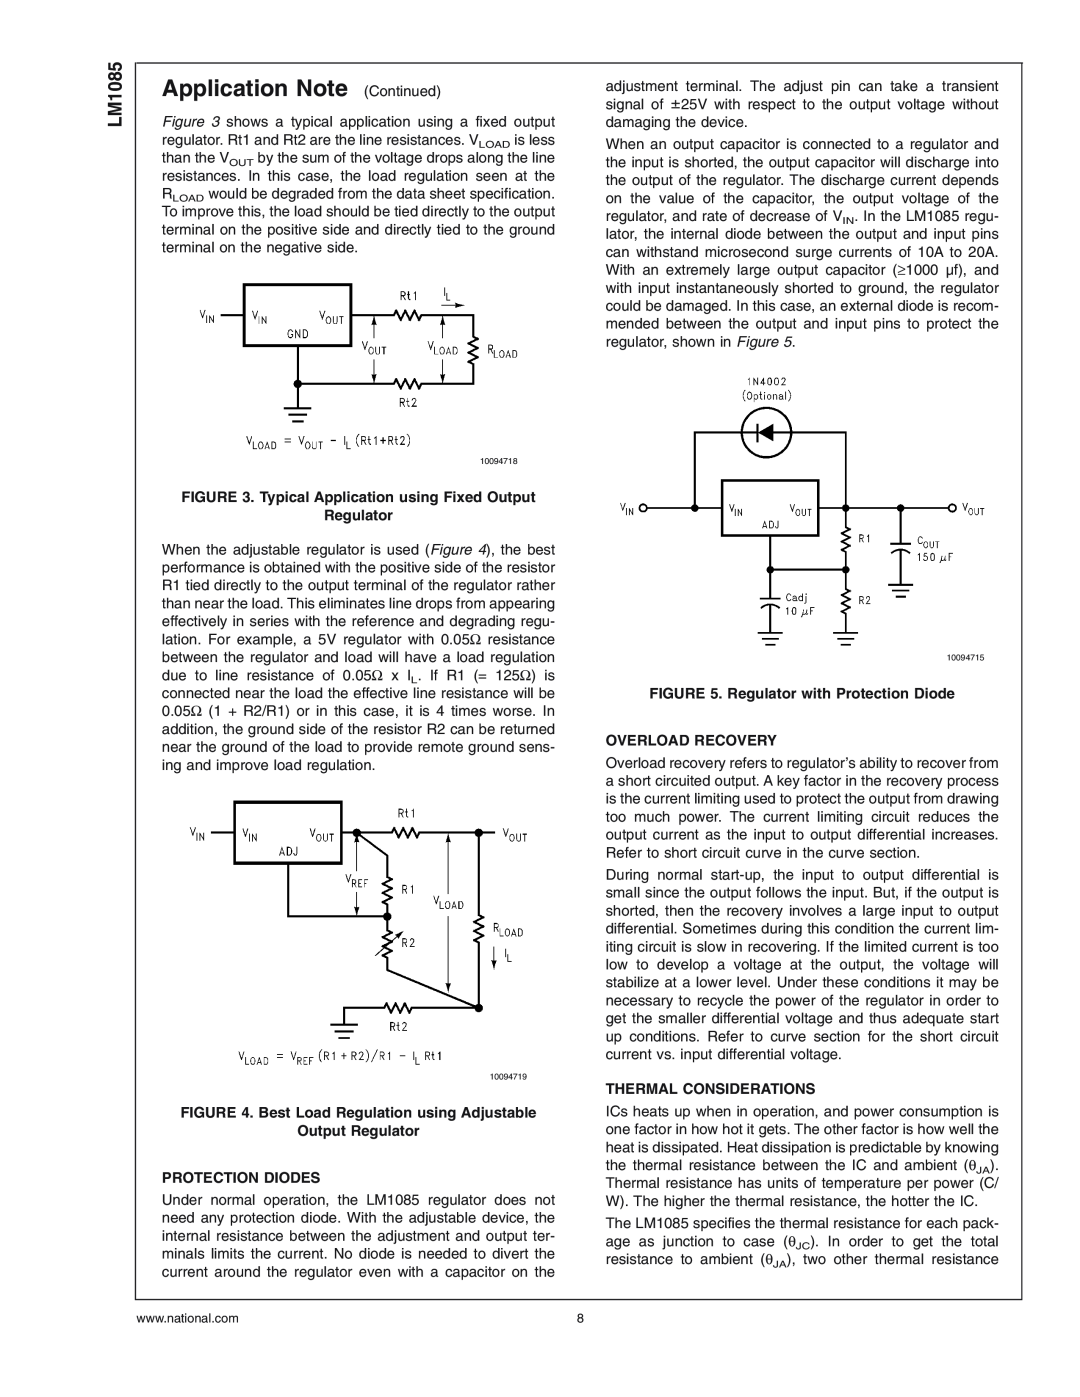 National Instruments LM1085 Series manual Application Note Continued, Typical Application using Fixed Output, Regulator 